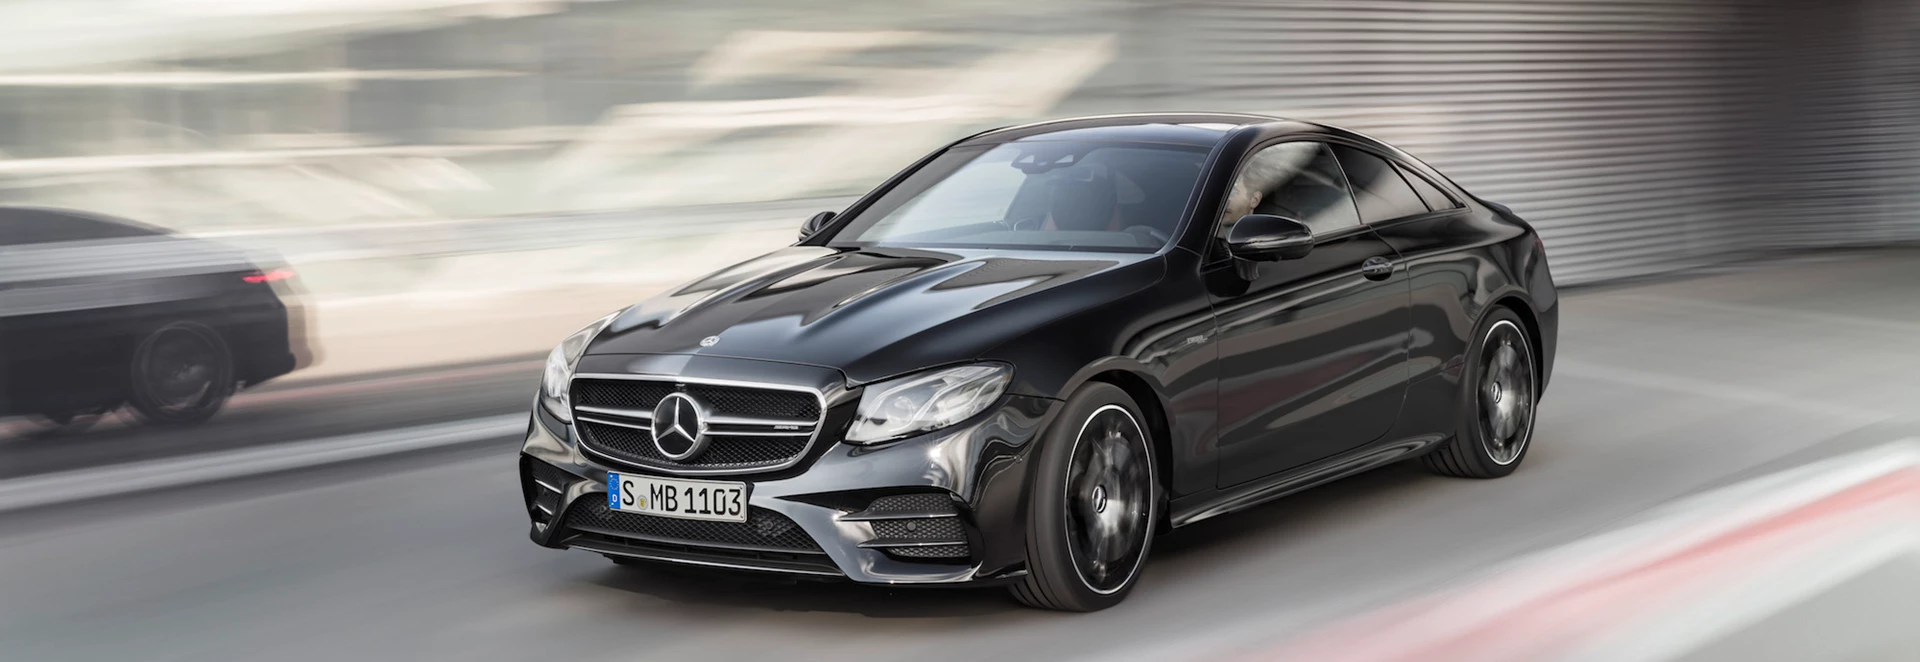 Mercedes- Benz adds new engines to E-Class line-up